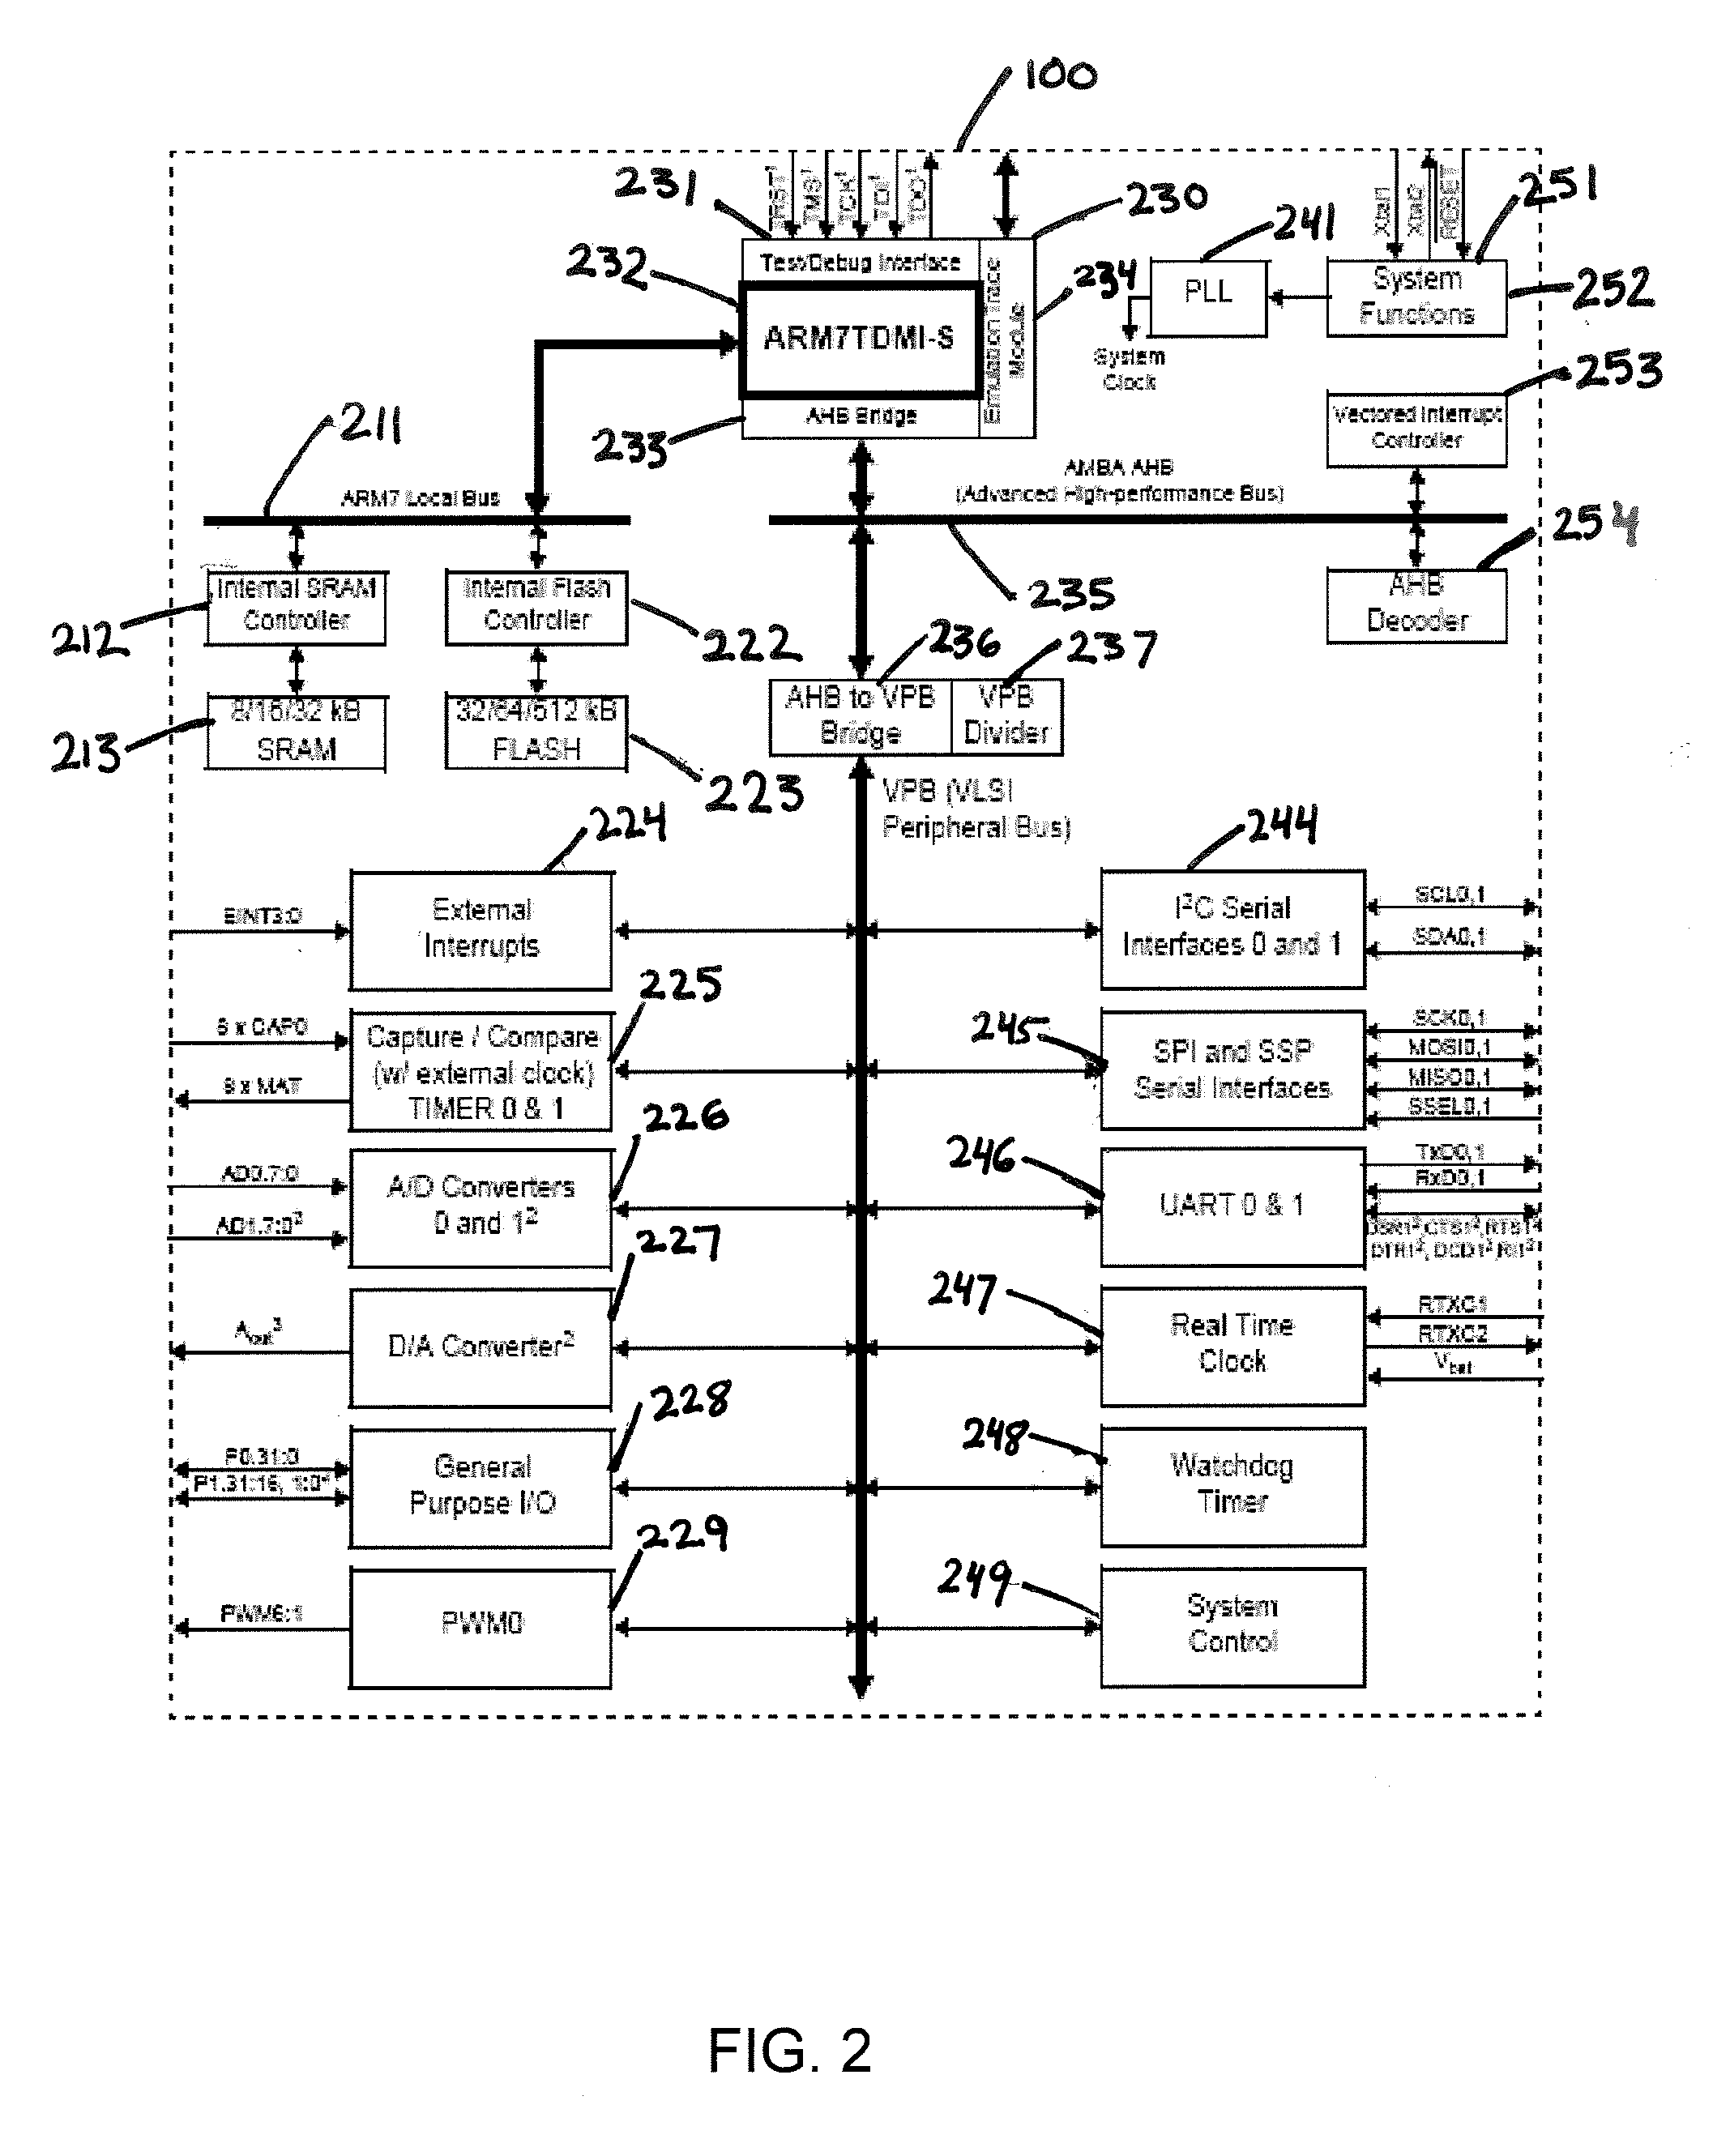 Tethered Digital Butler Consumer Electronic Device and Method